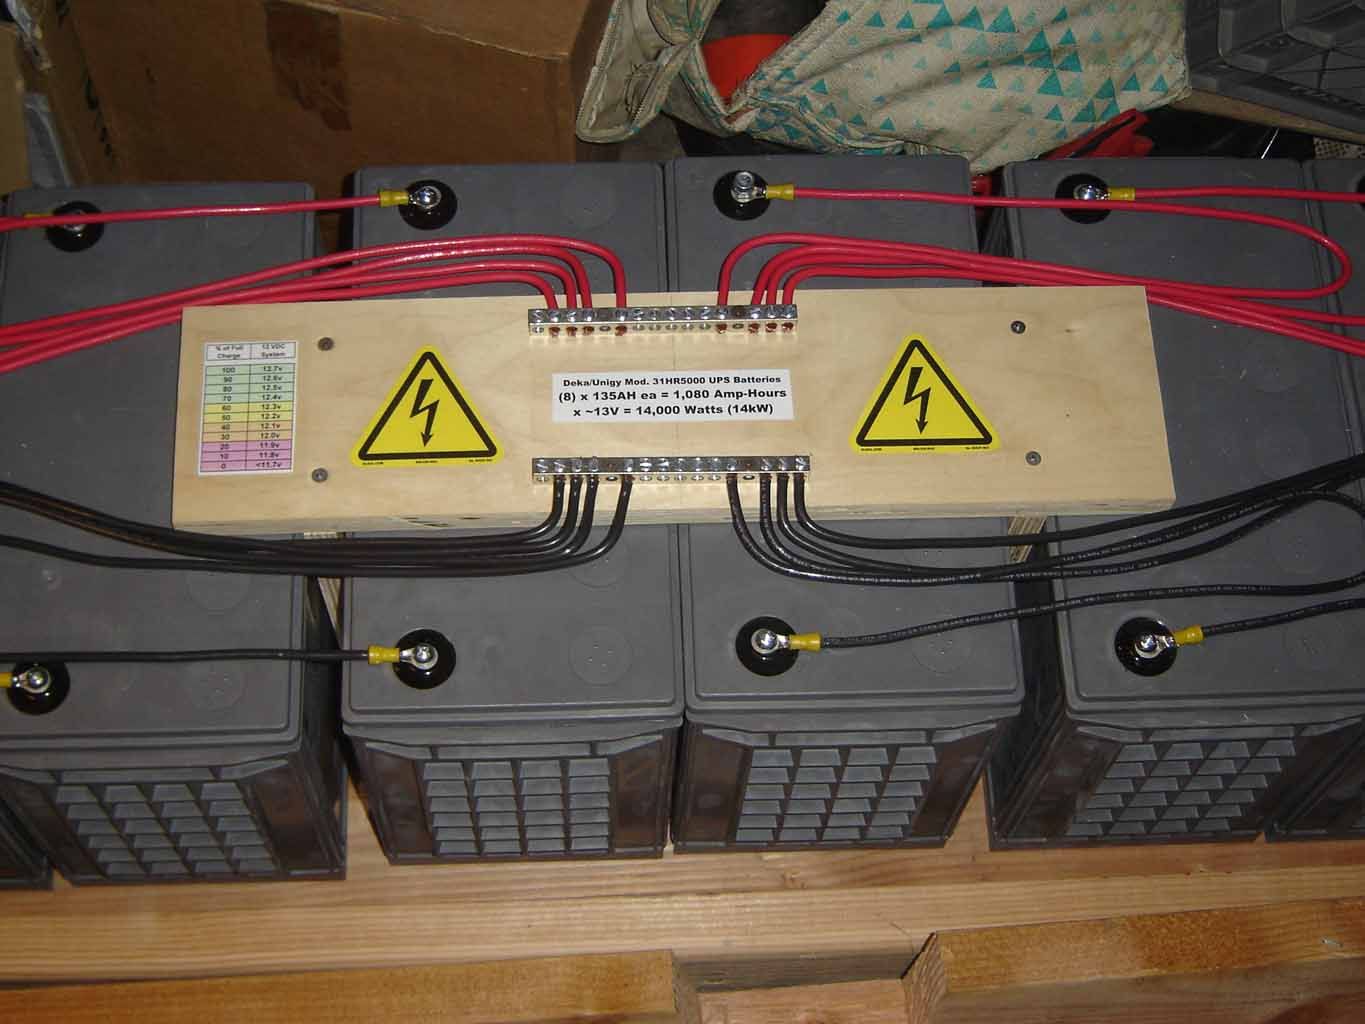 battery%20array%20keepalive%20wiring%20busses%20091120_zps9fuce2uy.jpg